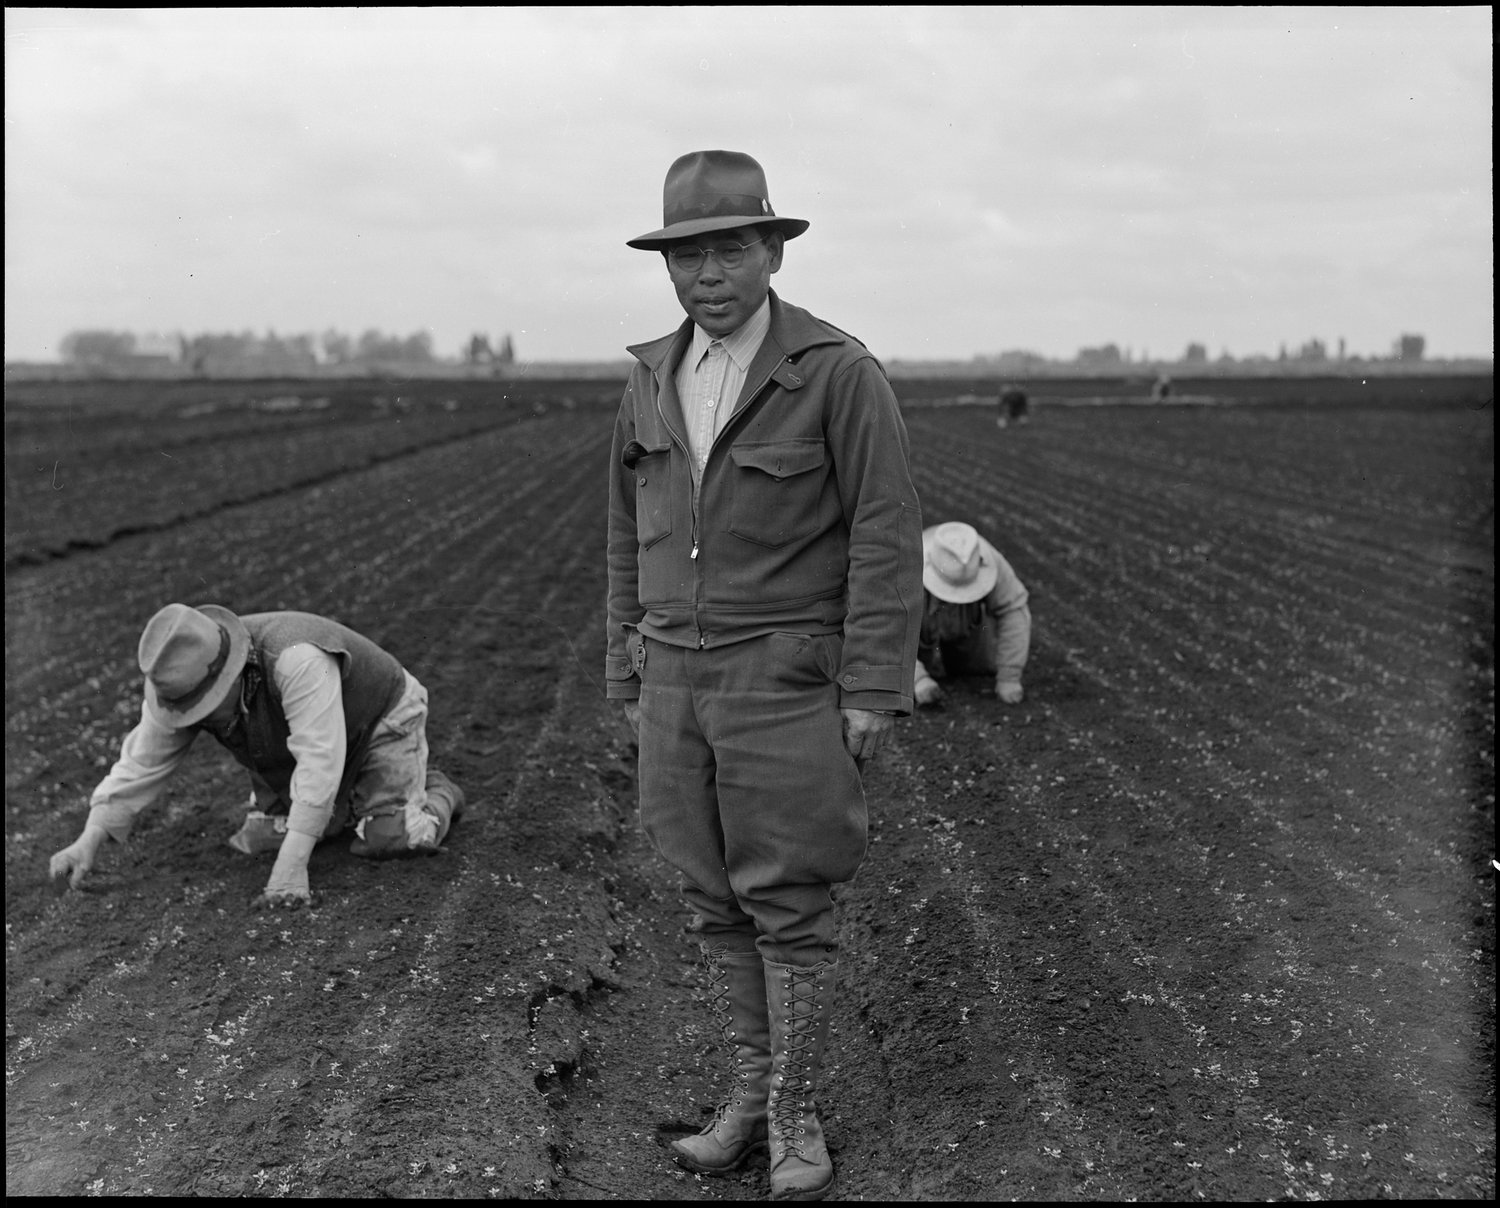  Stockton, California. Weeding celery field in the Delta region, prior to evacuation. Henry Futamachi, ranch manager, in foreground. Farmers and other evacuees of Japanese ancestry will be given opportunities to follow their callings in War Relocation Authority centers where they will spend the duration. 